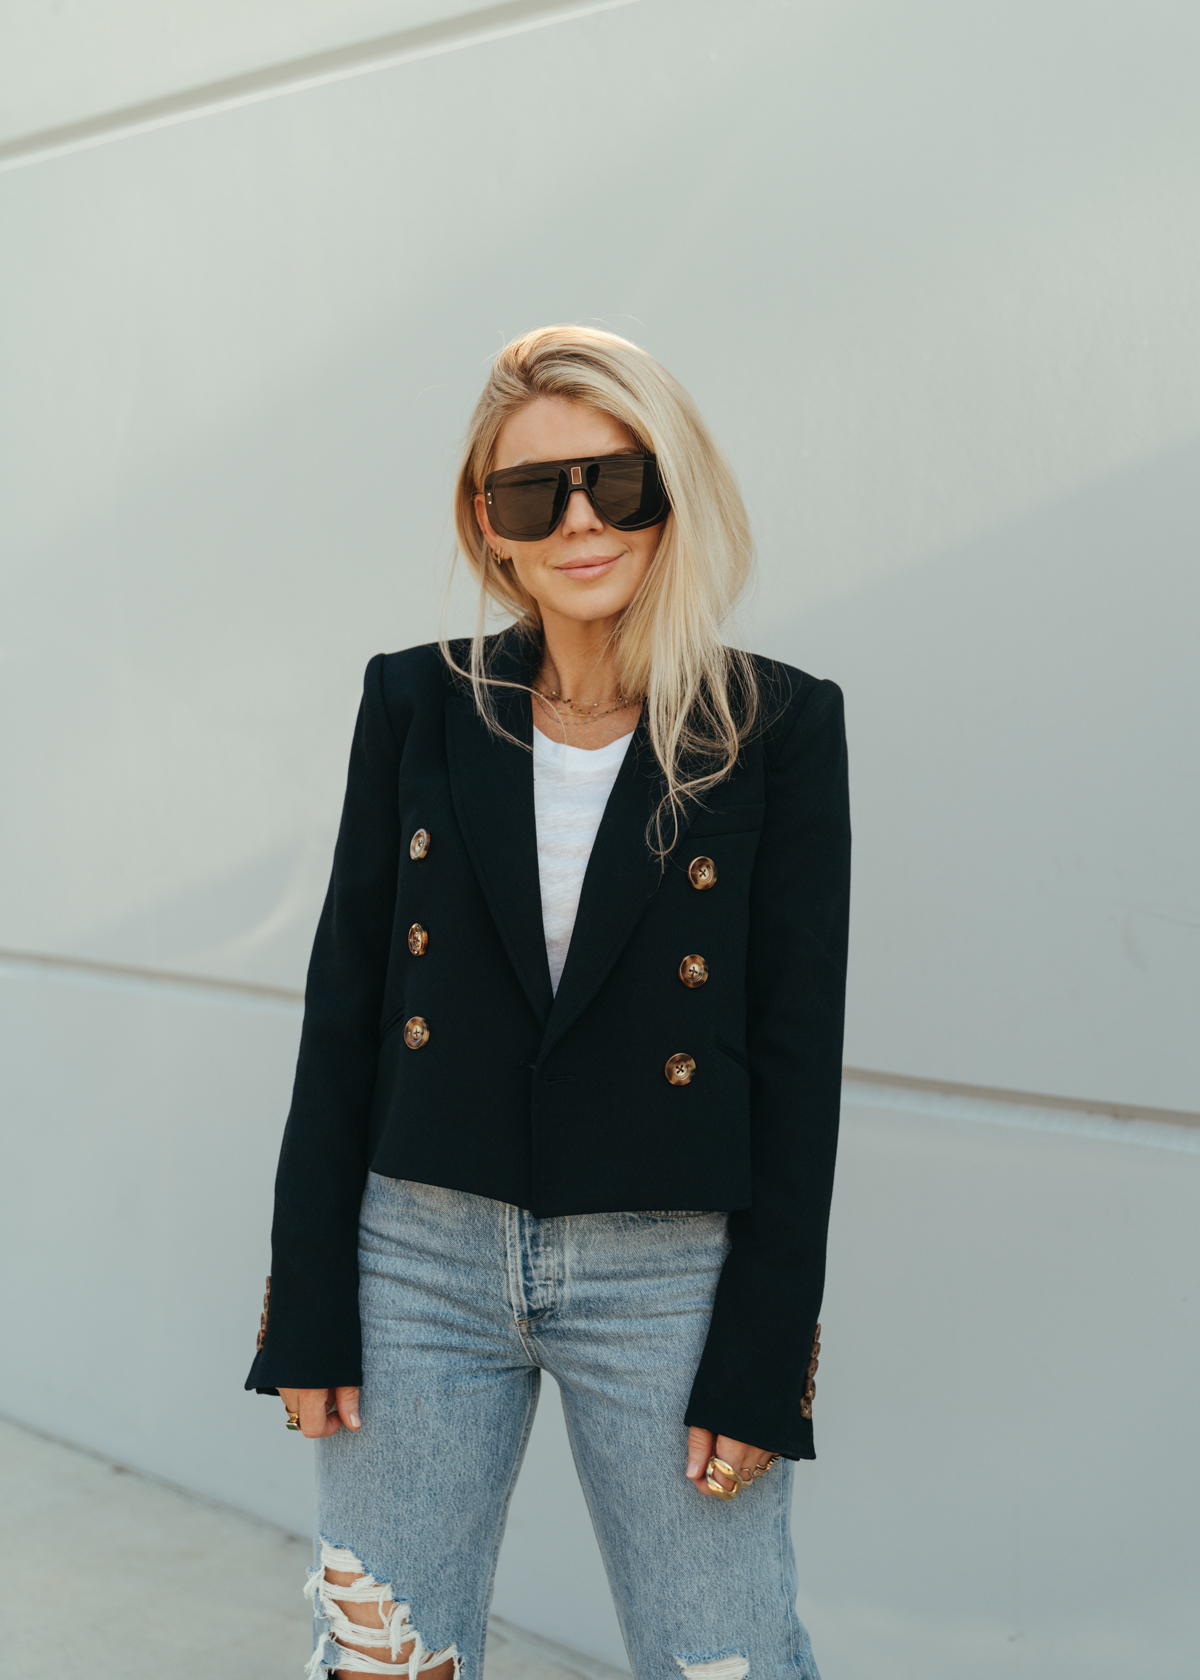 Stylish outerwear for Fall